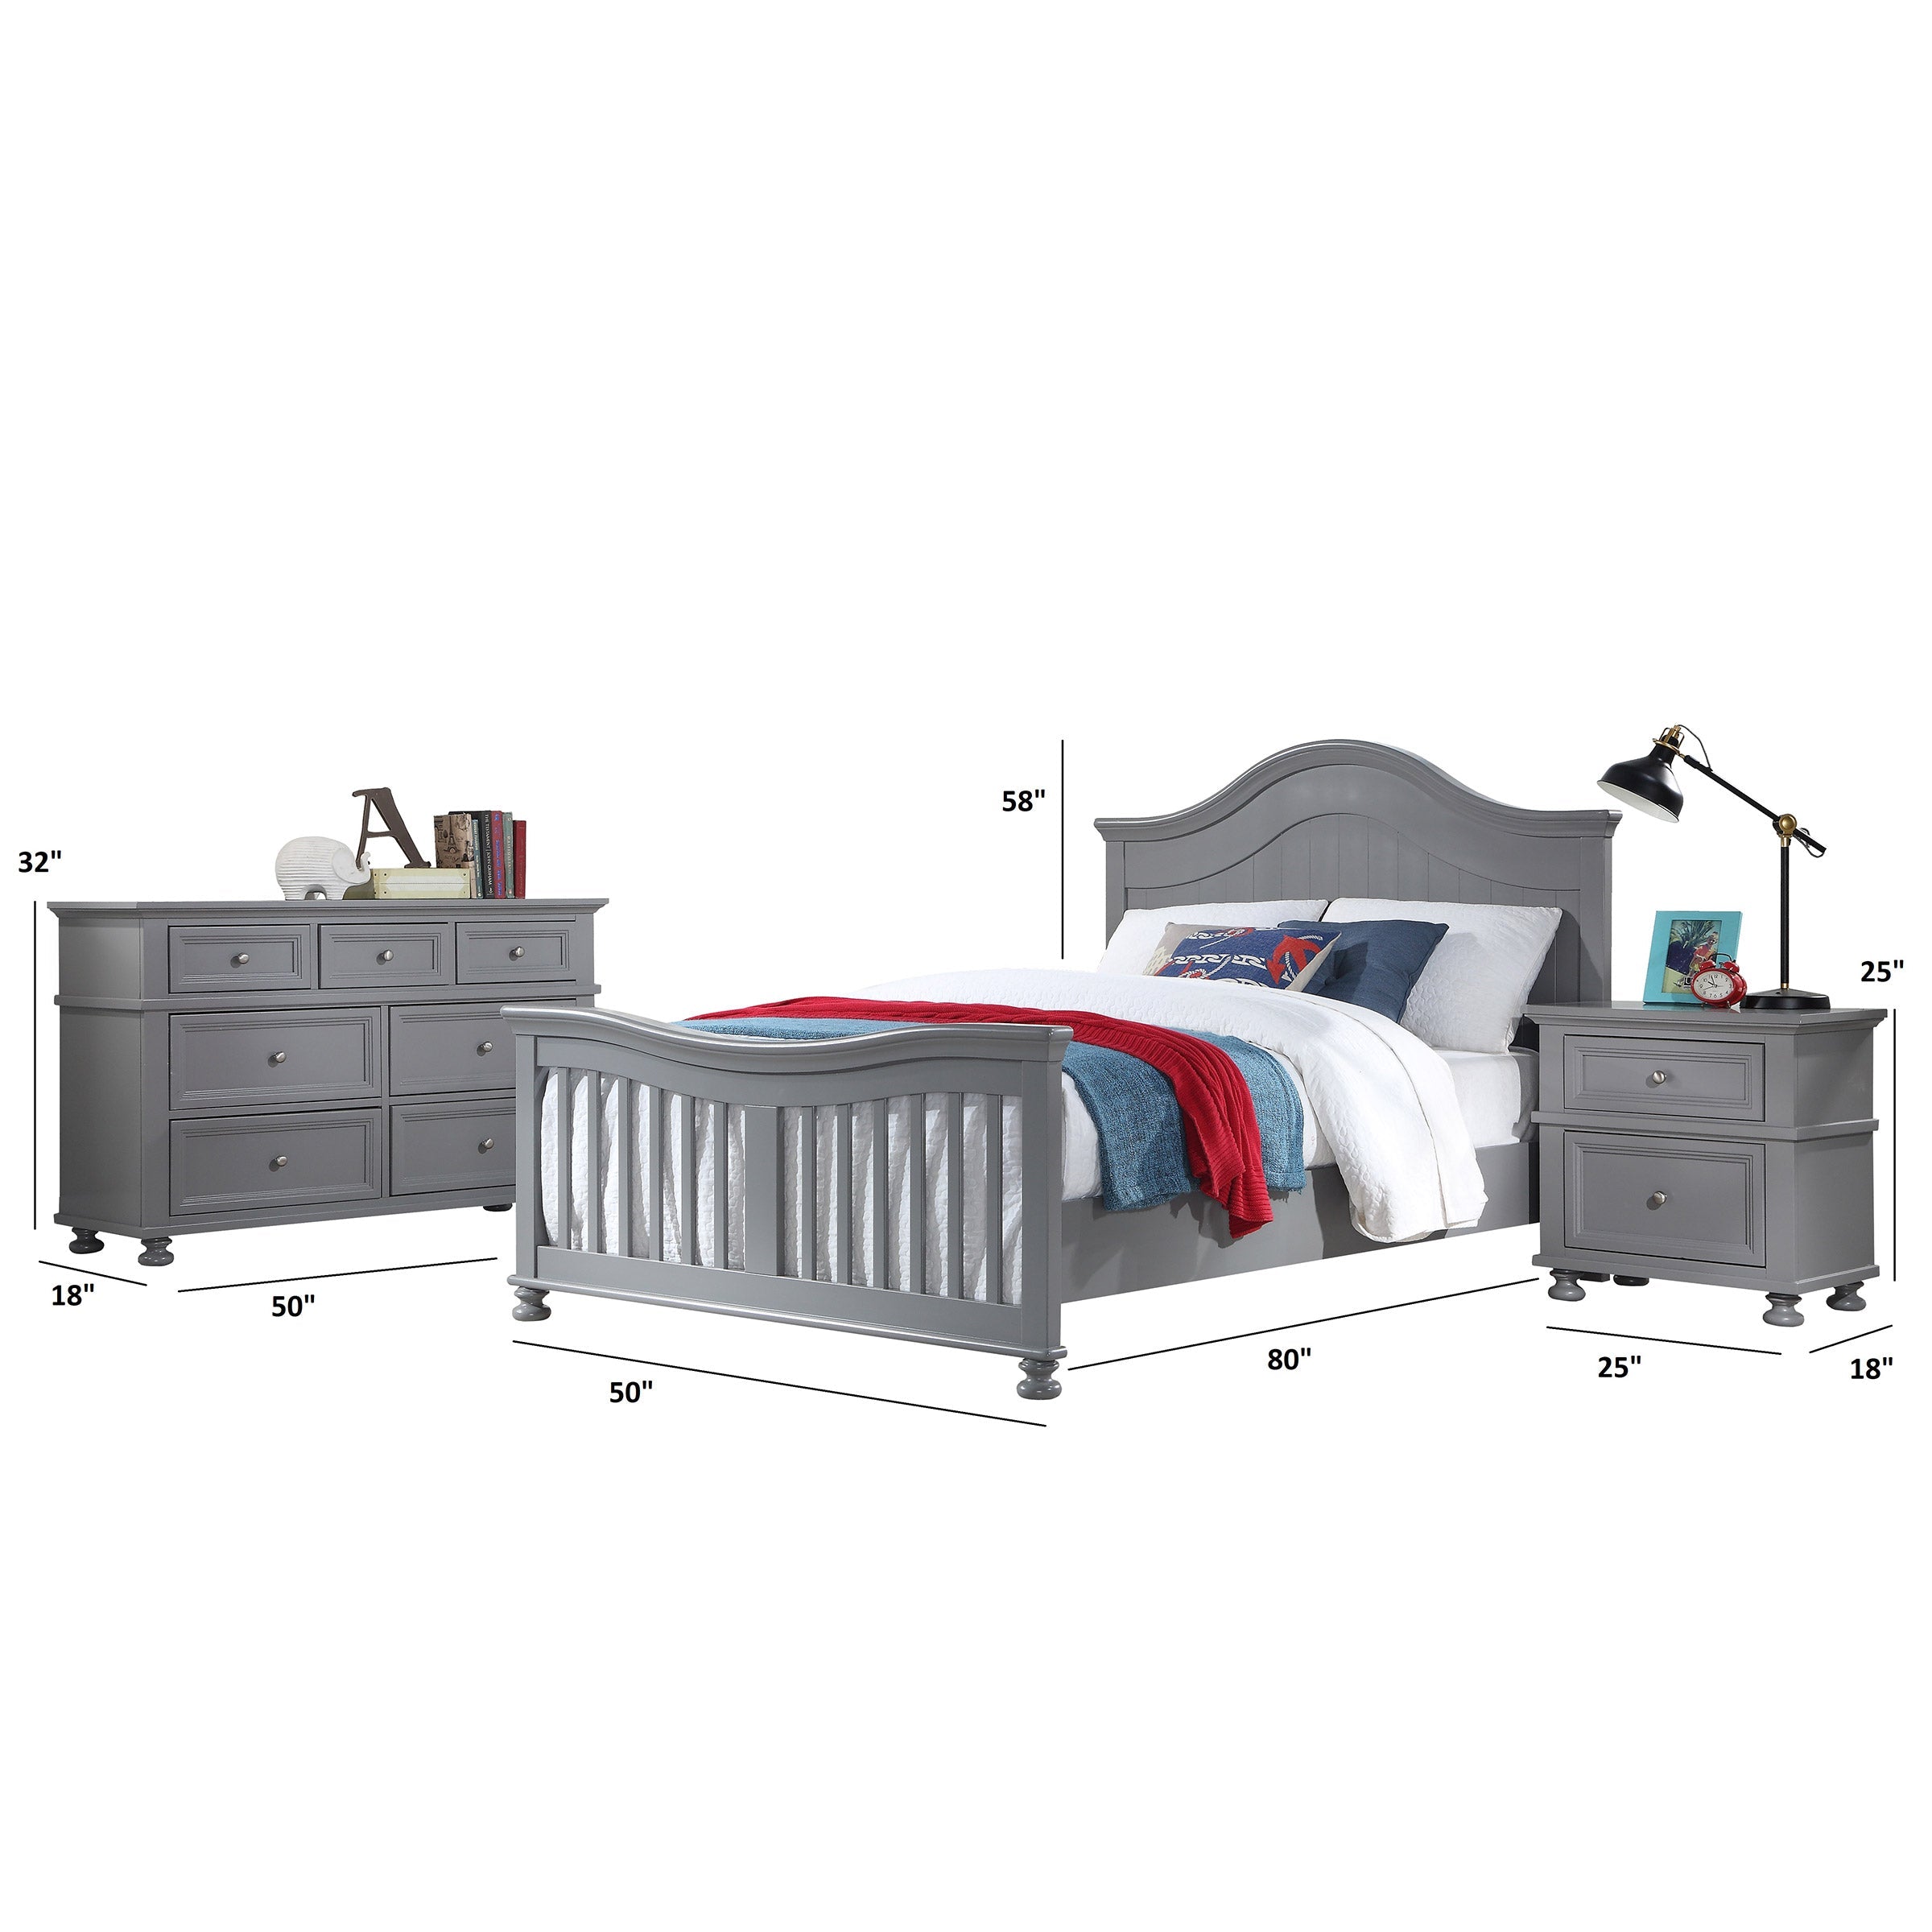 Carlie Youth Bedroom Collection